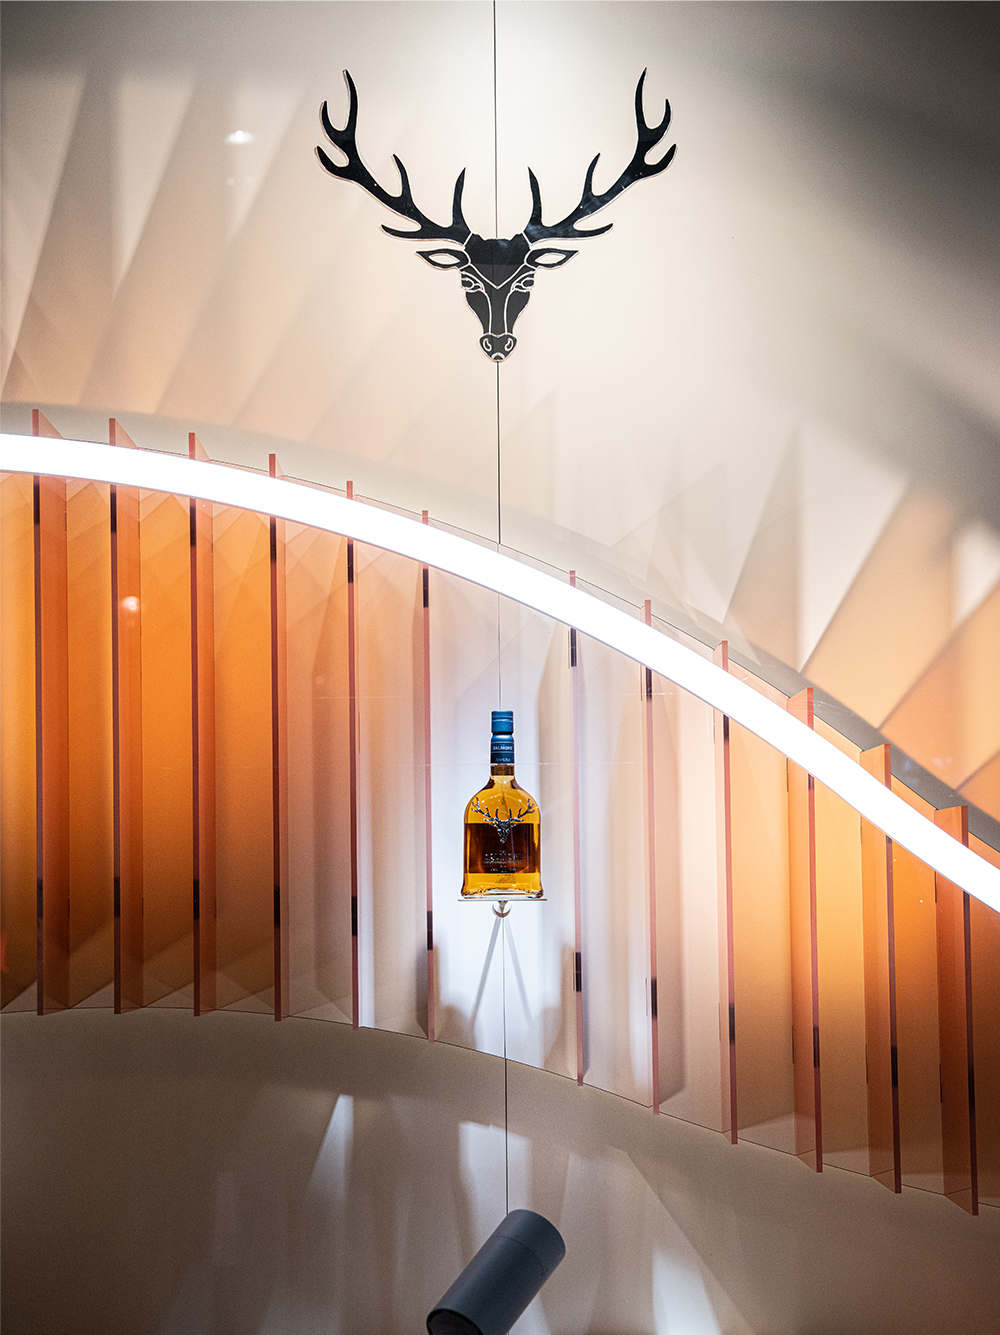 WHYTE & MACKAY - Dalmore: Hans Crescent Windows by L'Atelier Five